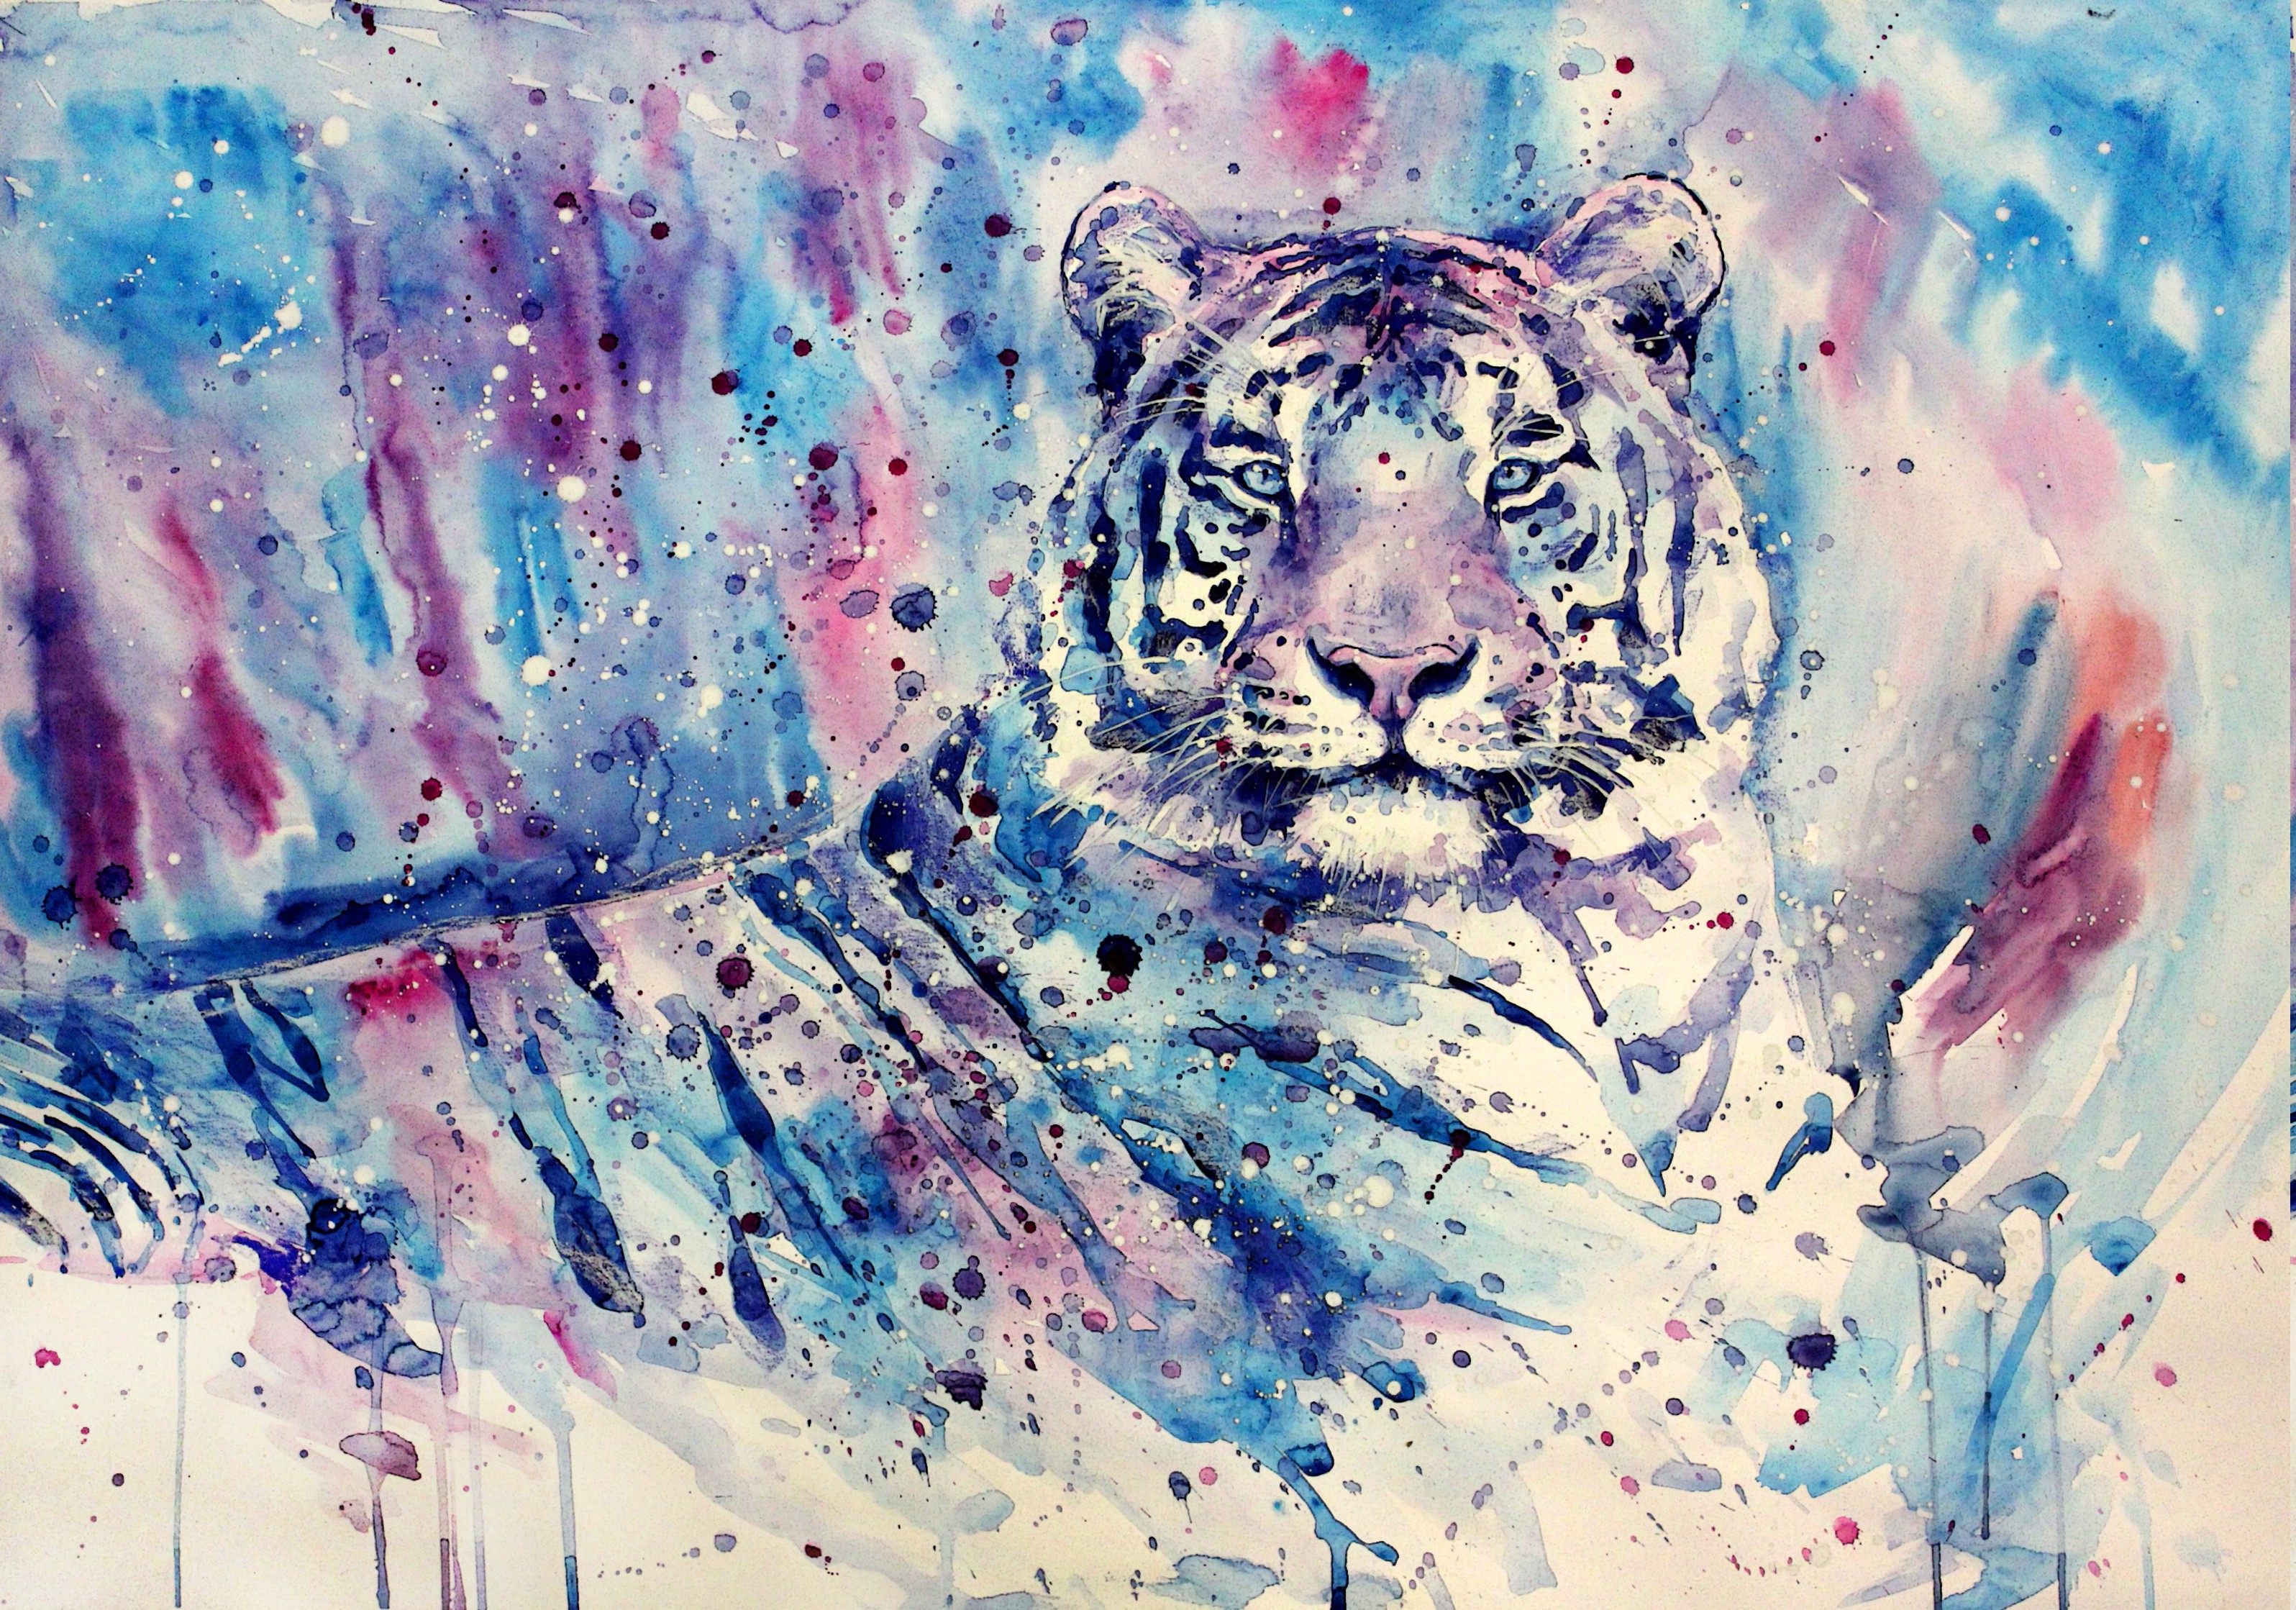 https://wallup.net/wp-content/uploads/2016/01/176854-white_tigers-tiger-artwork-painting-watercolor-blue-purple-animals.jpg